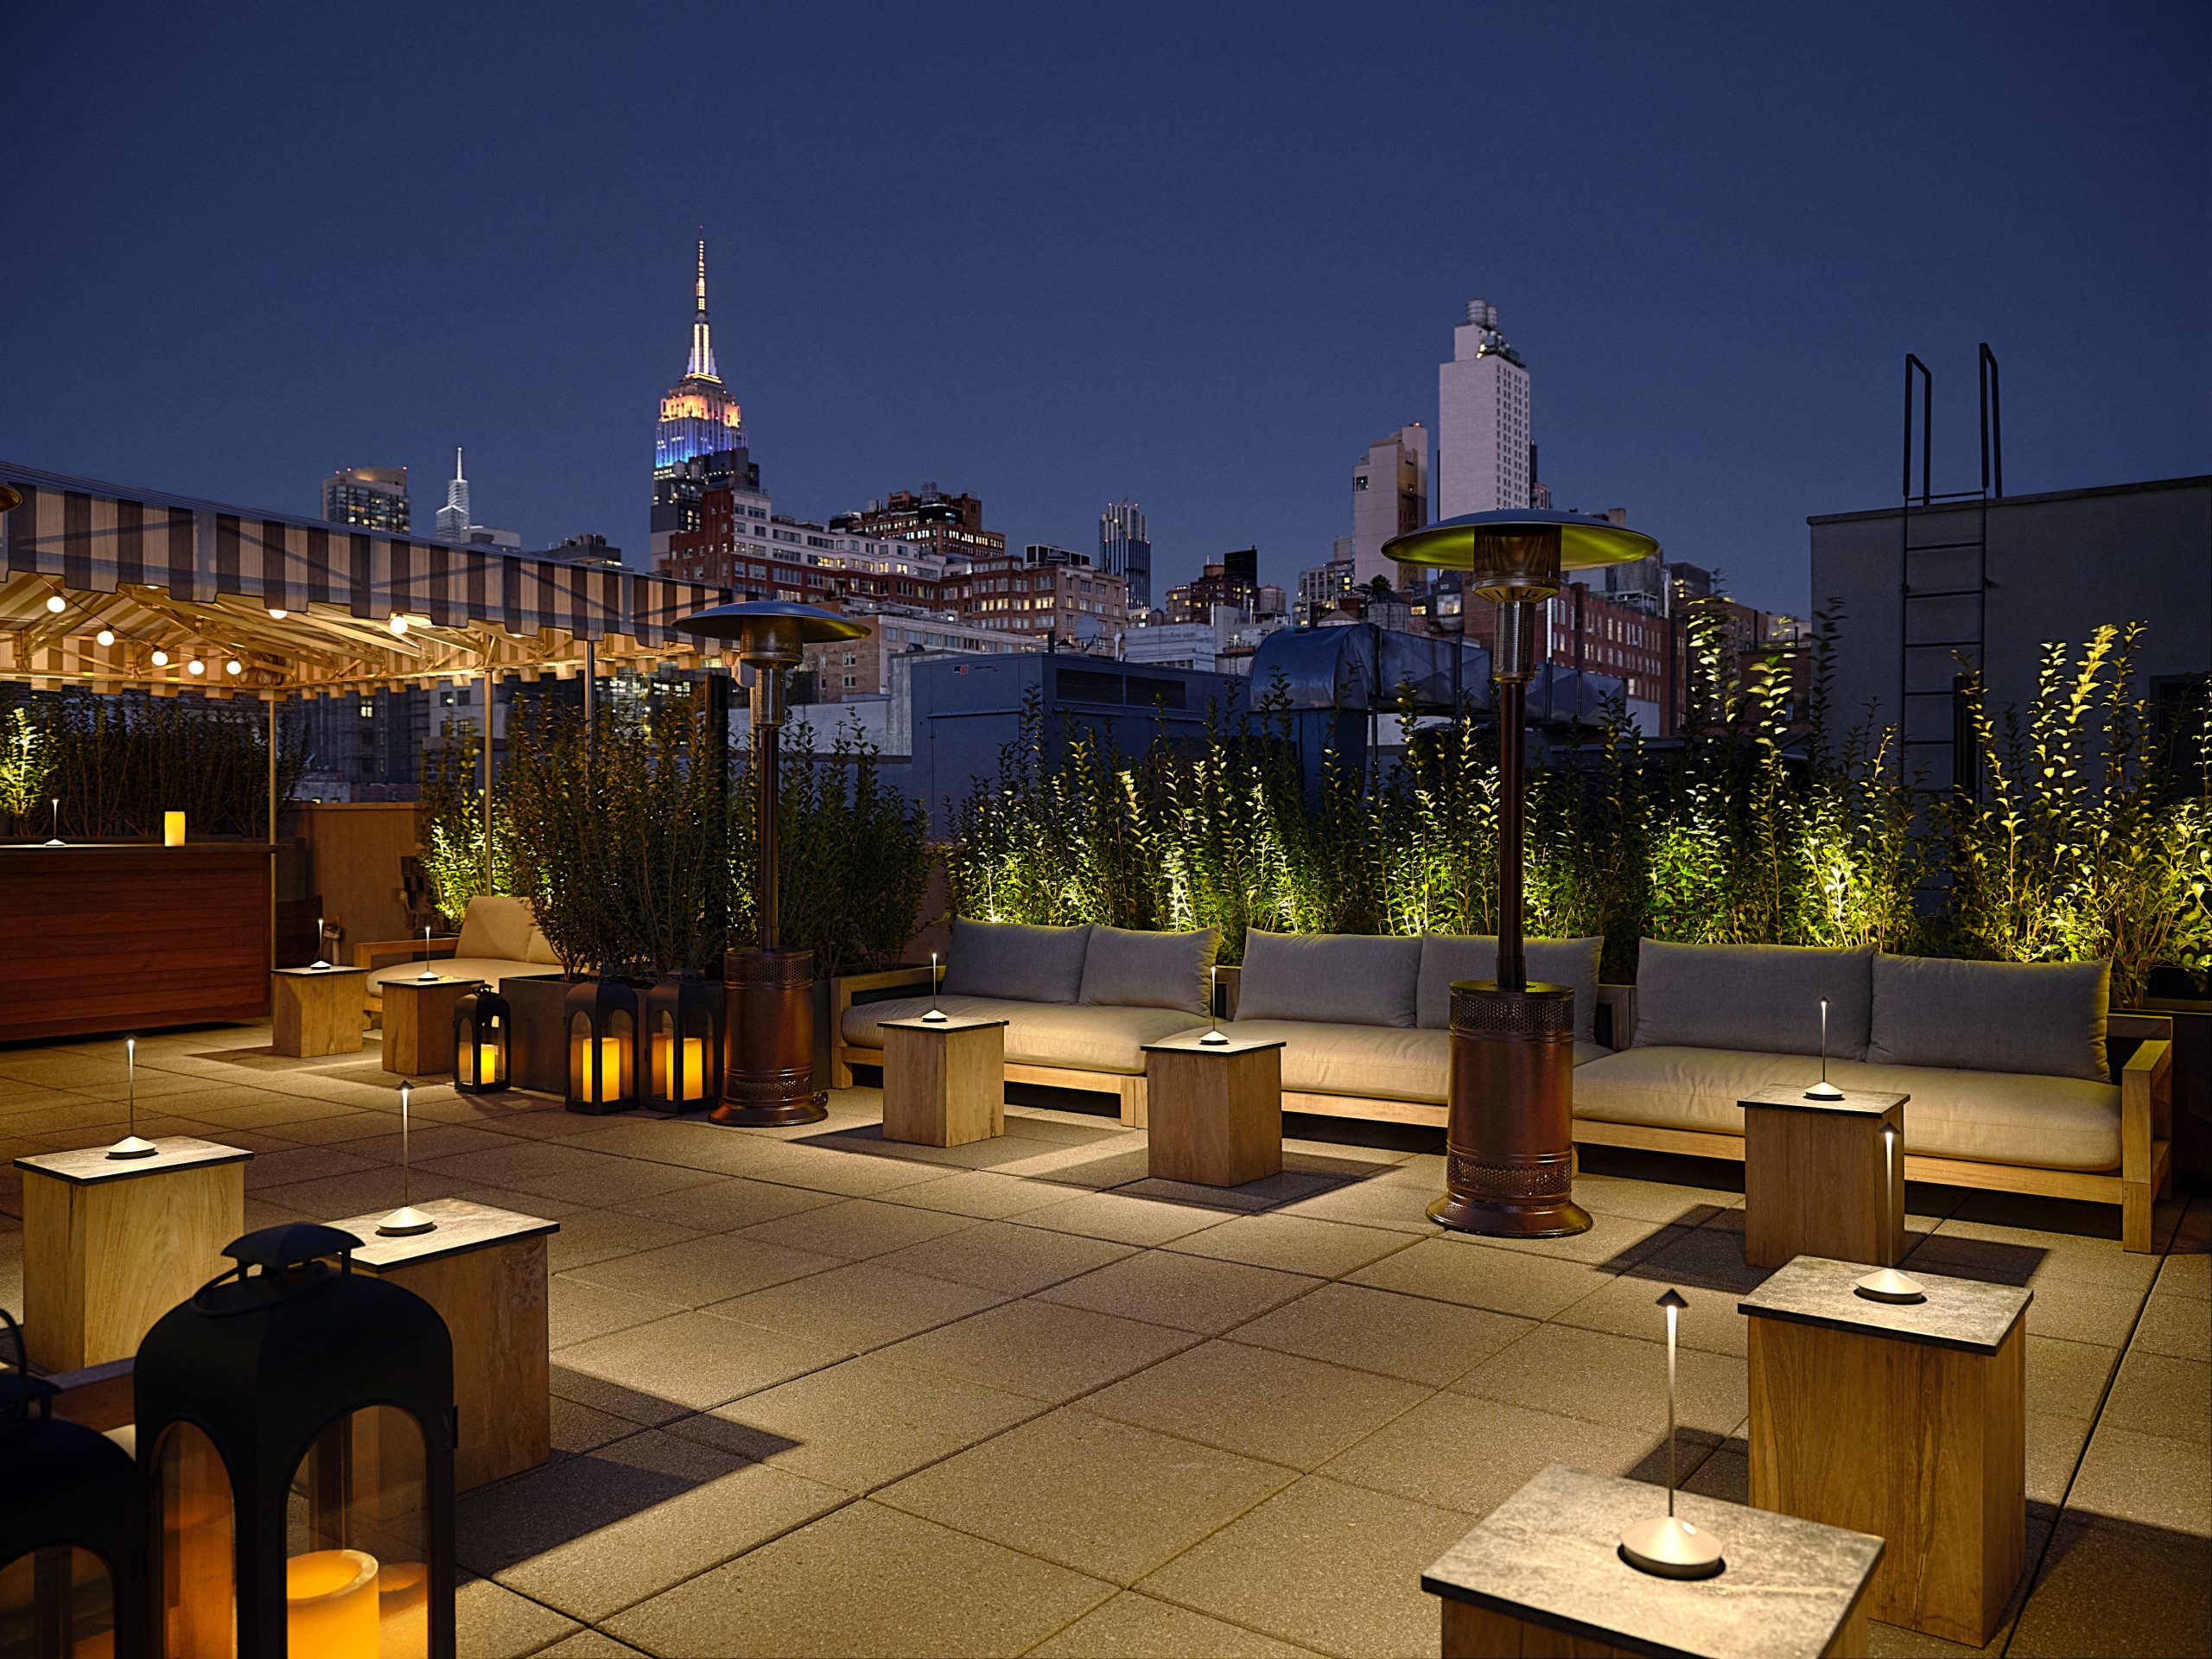 Enjoy A Laid-back And Stylish Stay At The Moore, New York